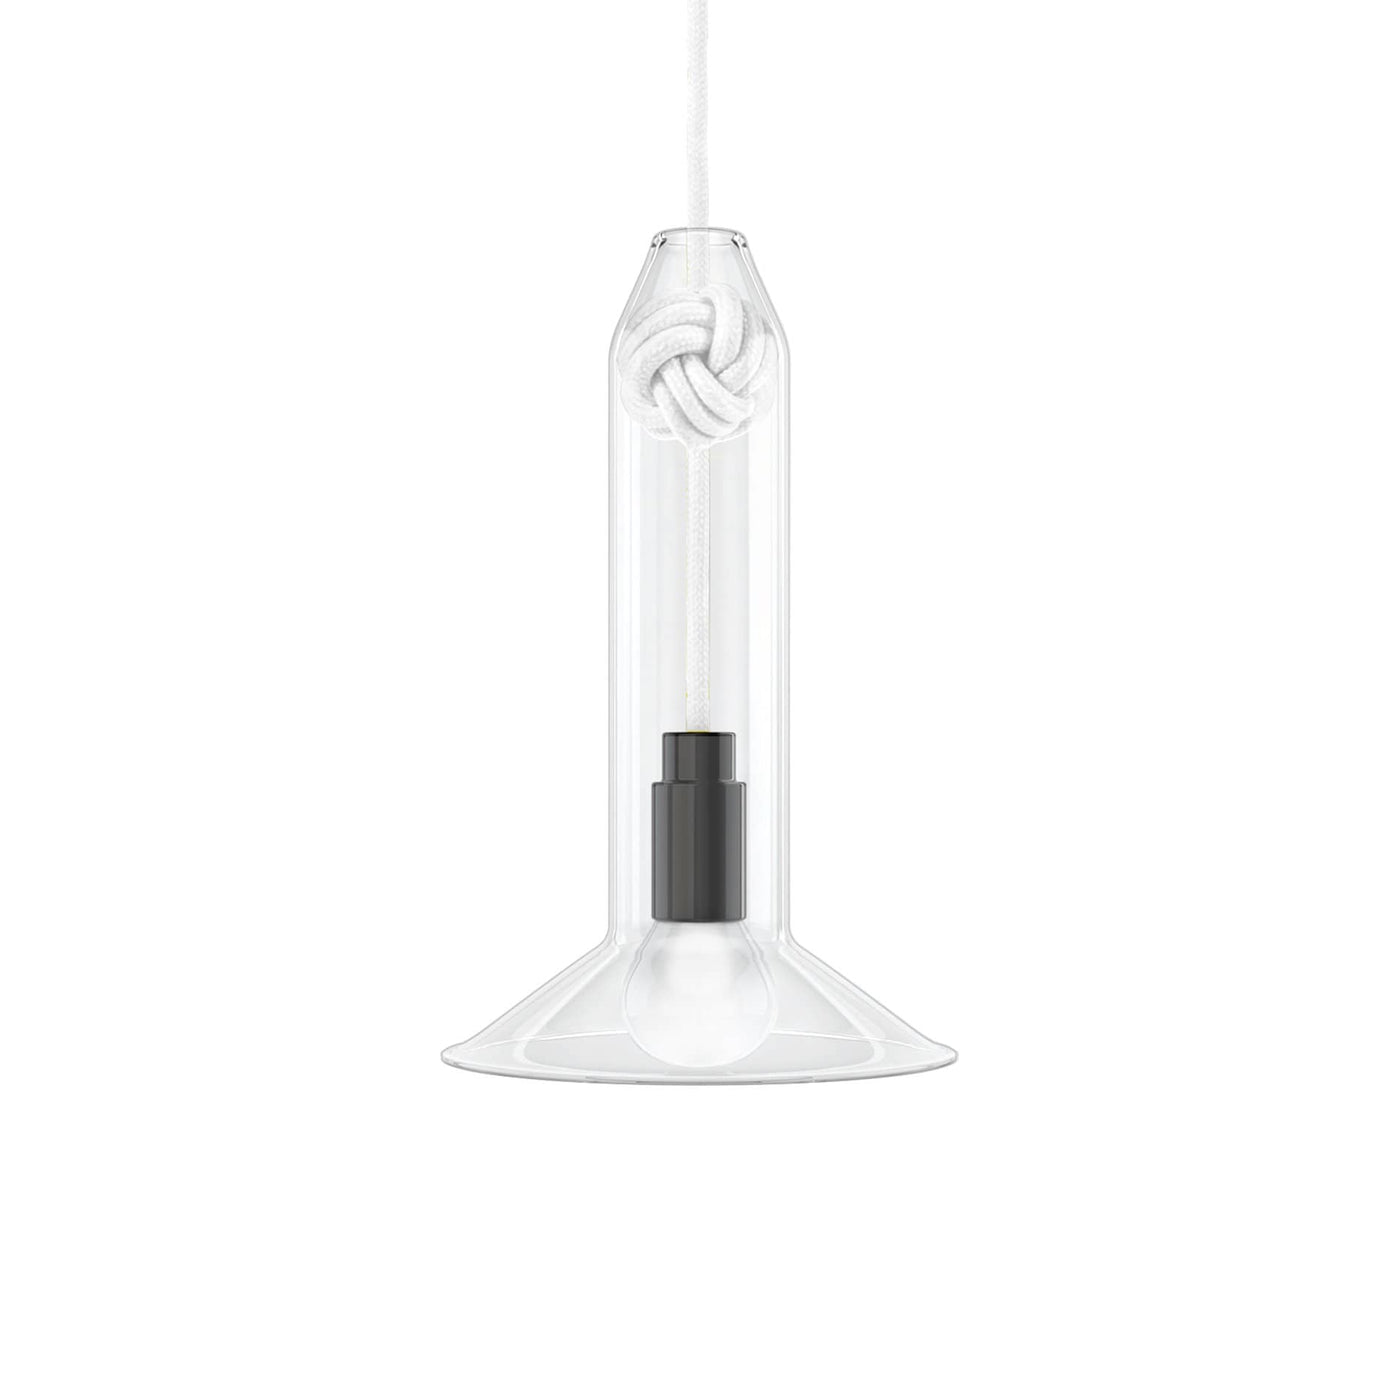 Vitamin small Knot Lamp ceiling pendant. Shop online at someday designs. #colour_white